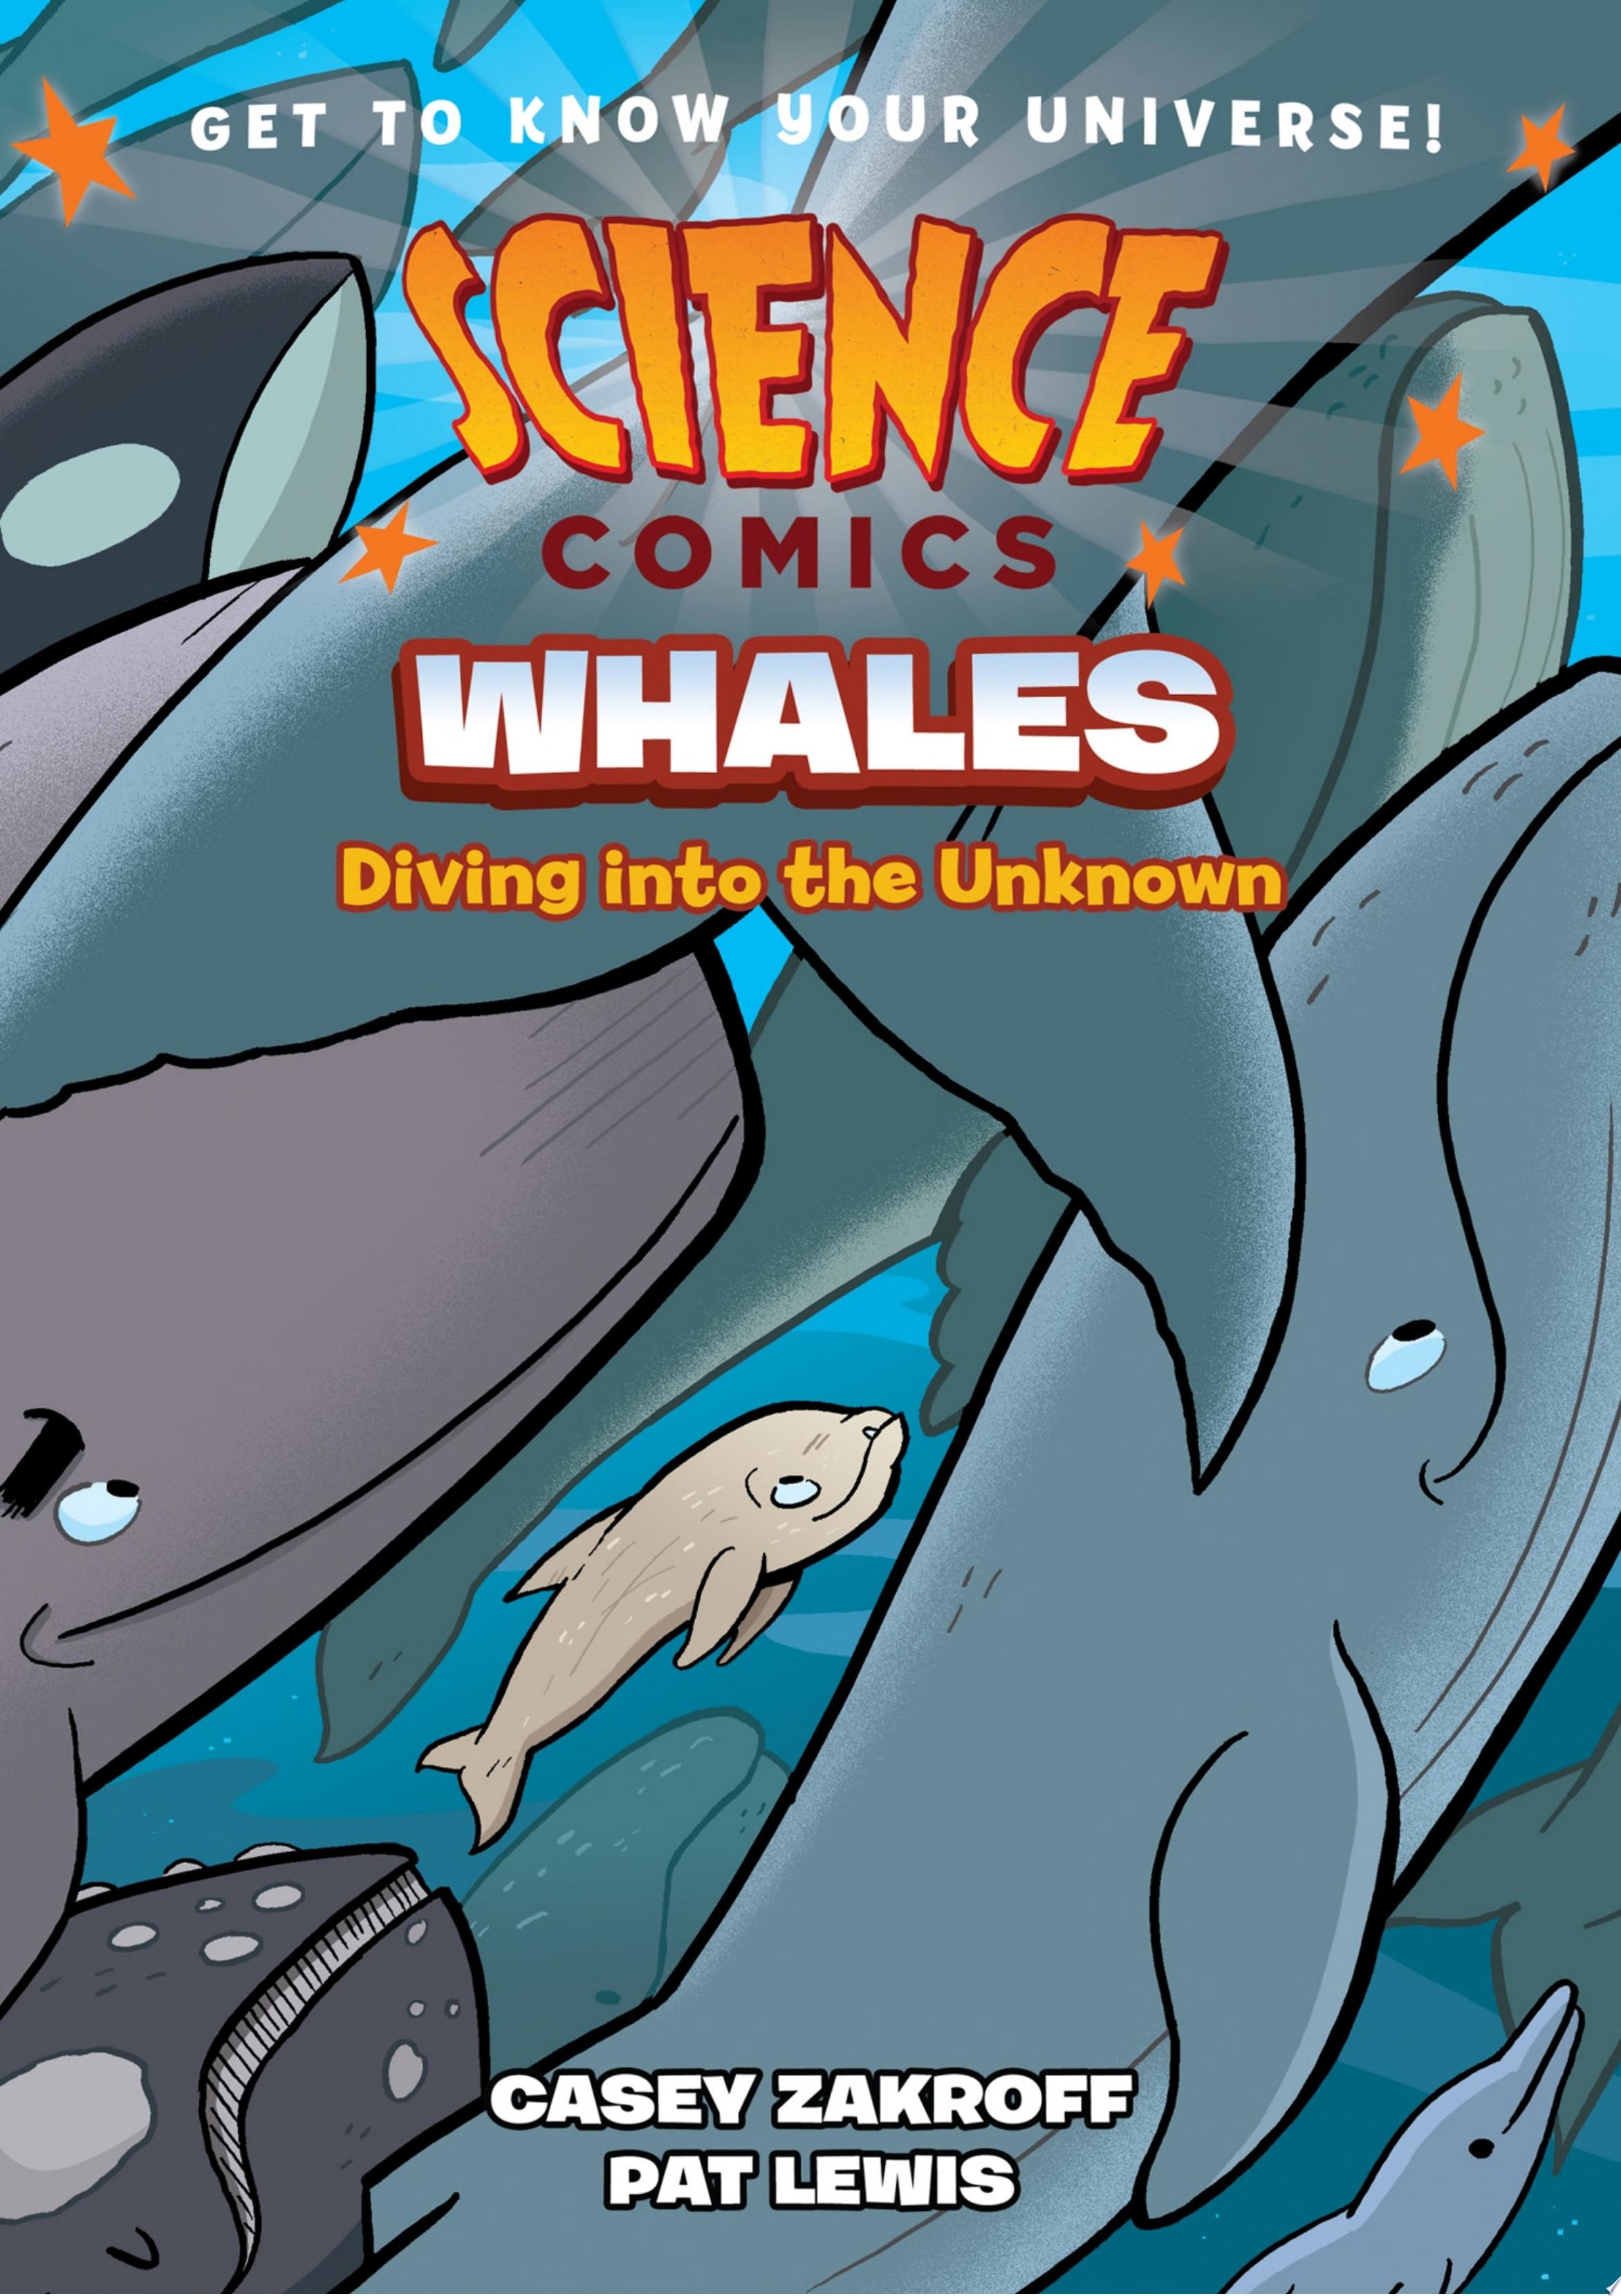 Image for "Science Comics: Whales"